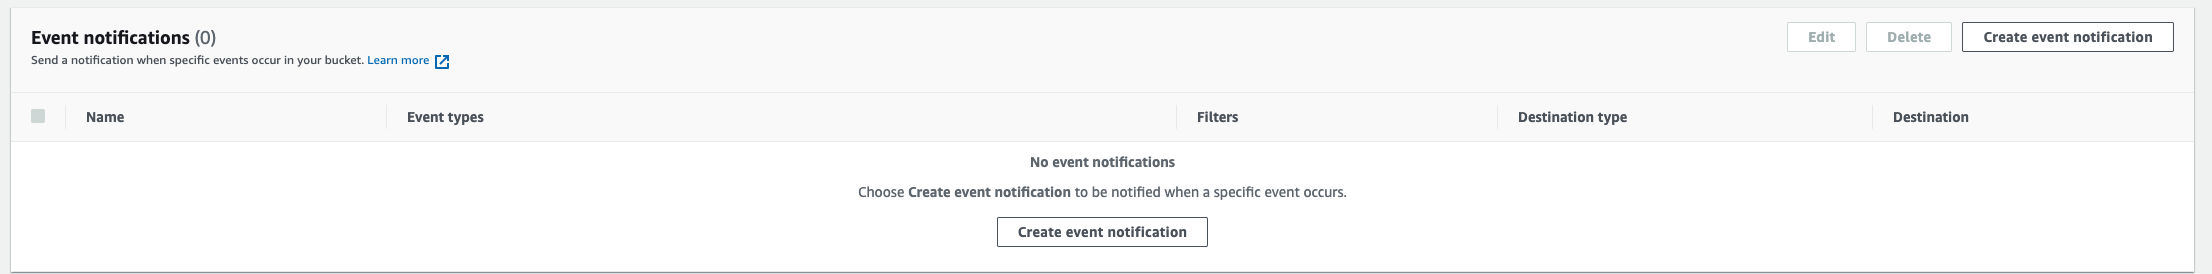 Event_Notifications__1_.png